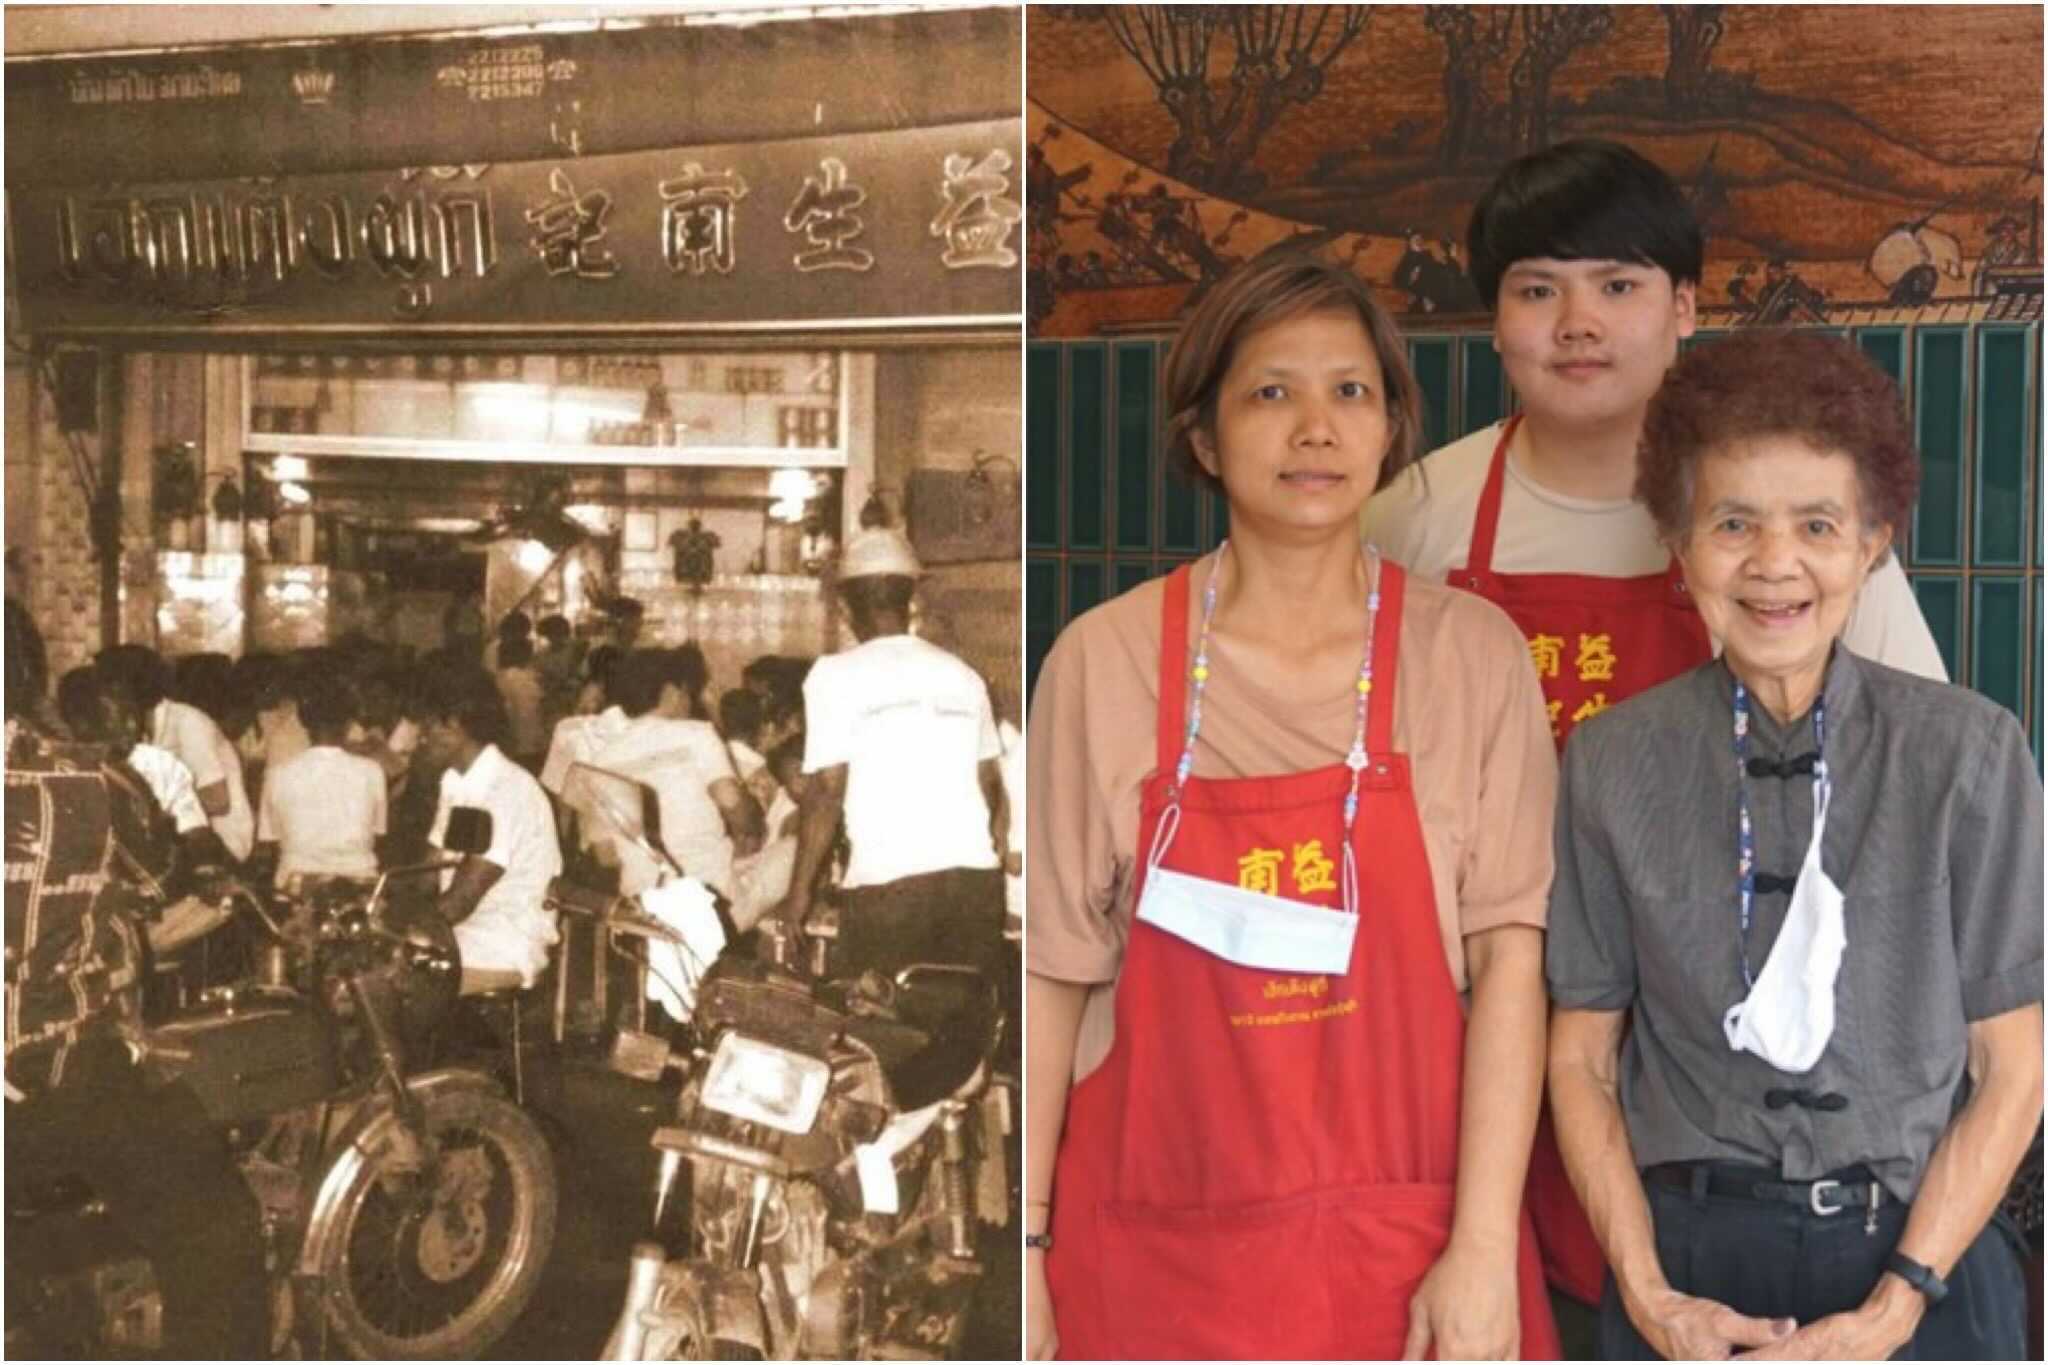 Ek Teng Phu Ki in the 1980s, at left. At right, three generations of management with 21-year-old Thanachot “Boss” Singkinvit in the middle. Photos: Ek Teng Phu Ki, Coconuts
